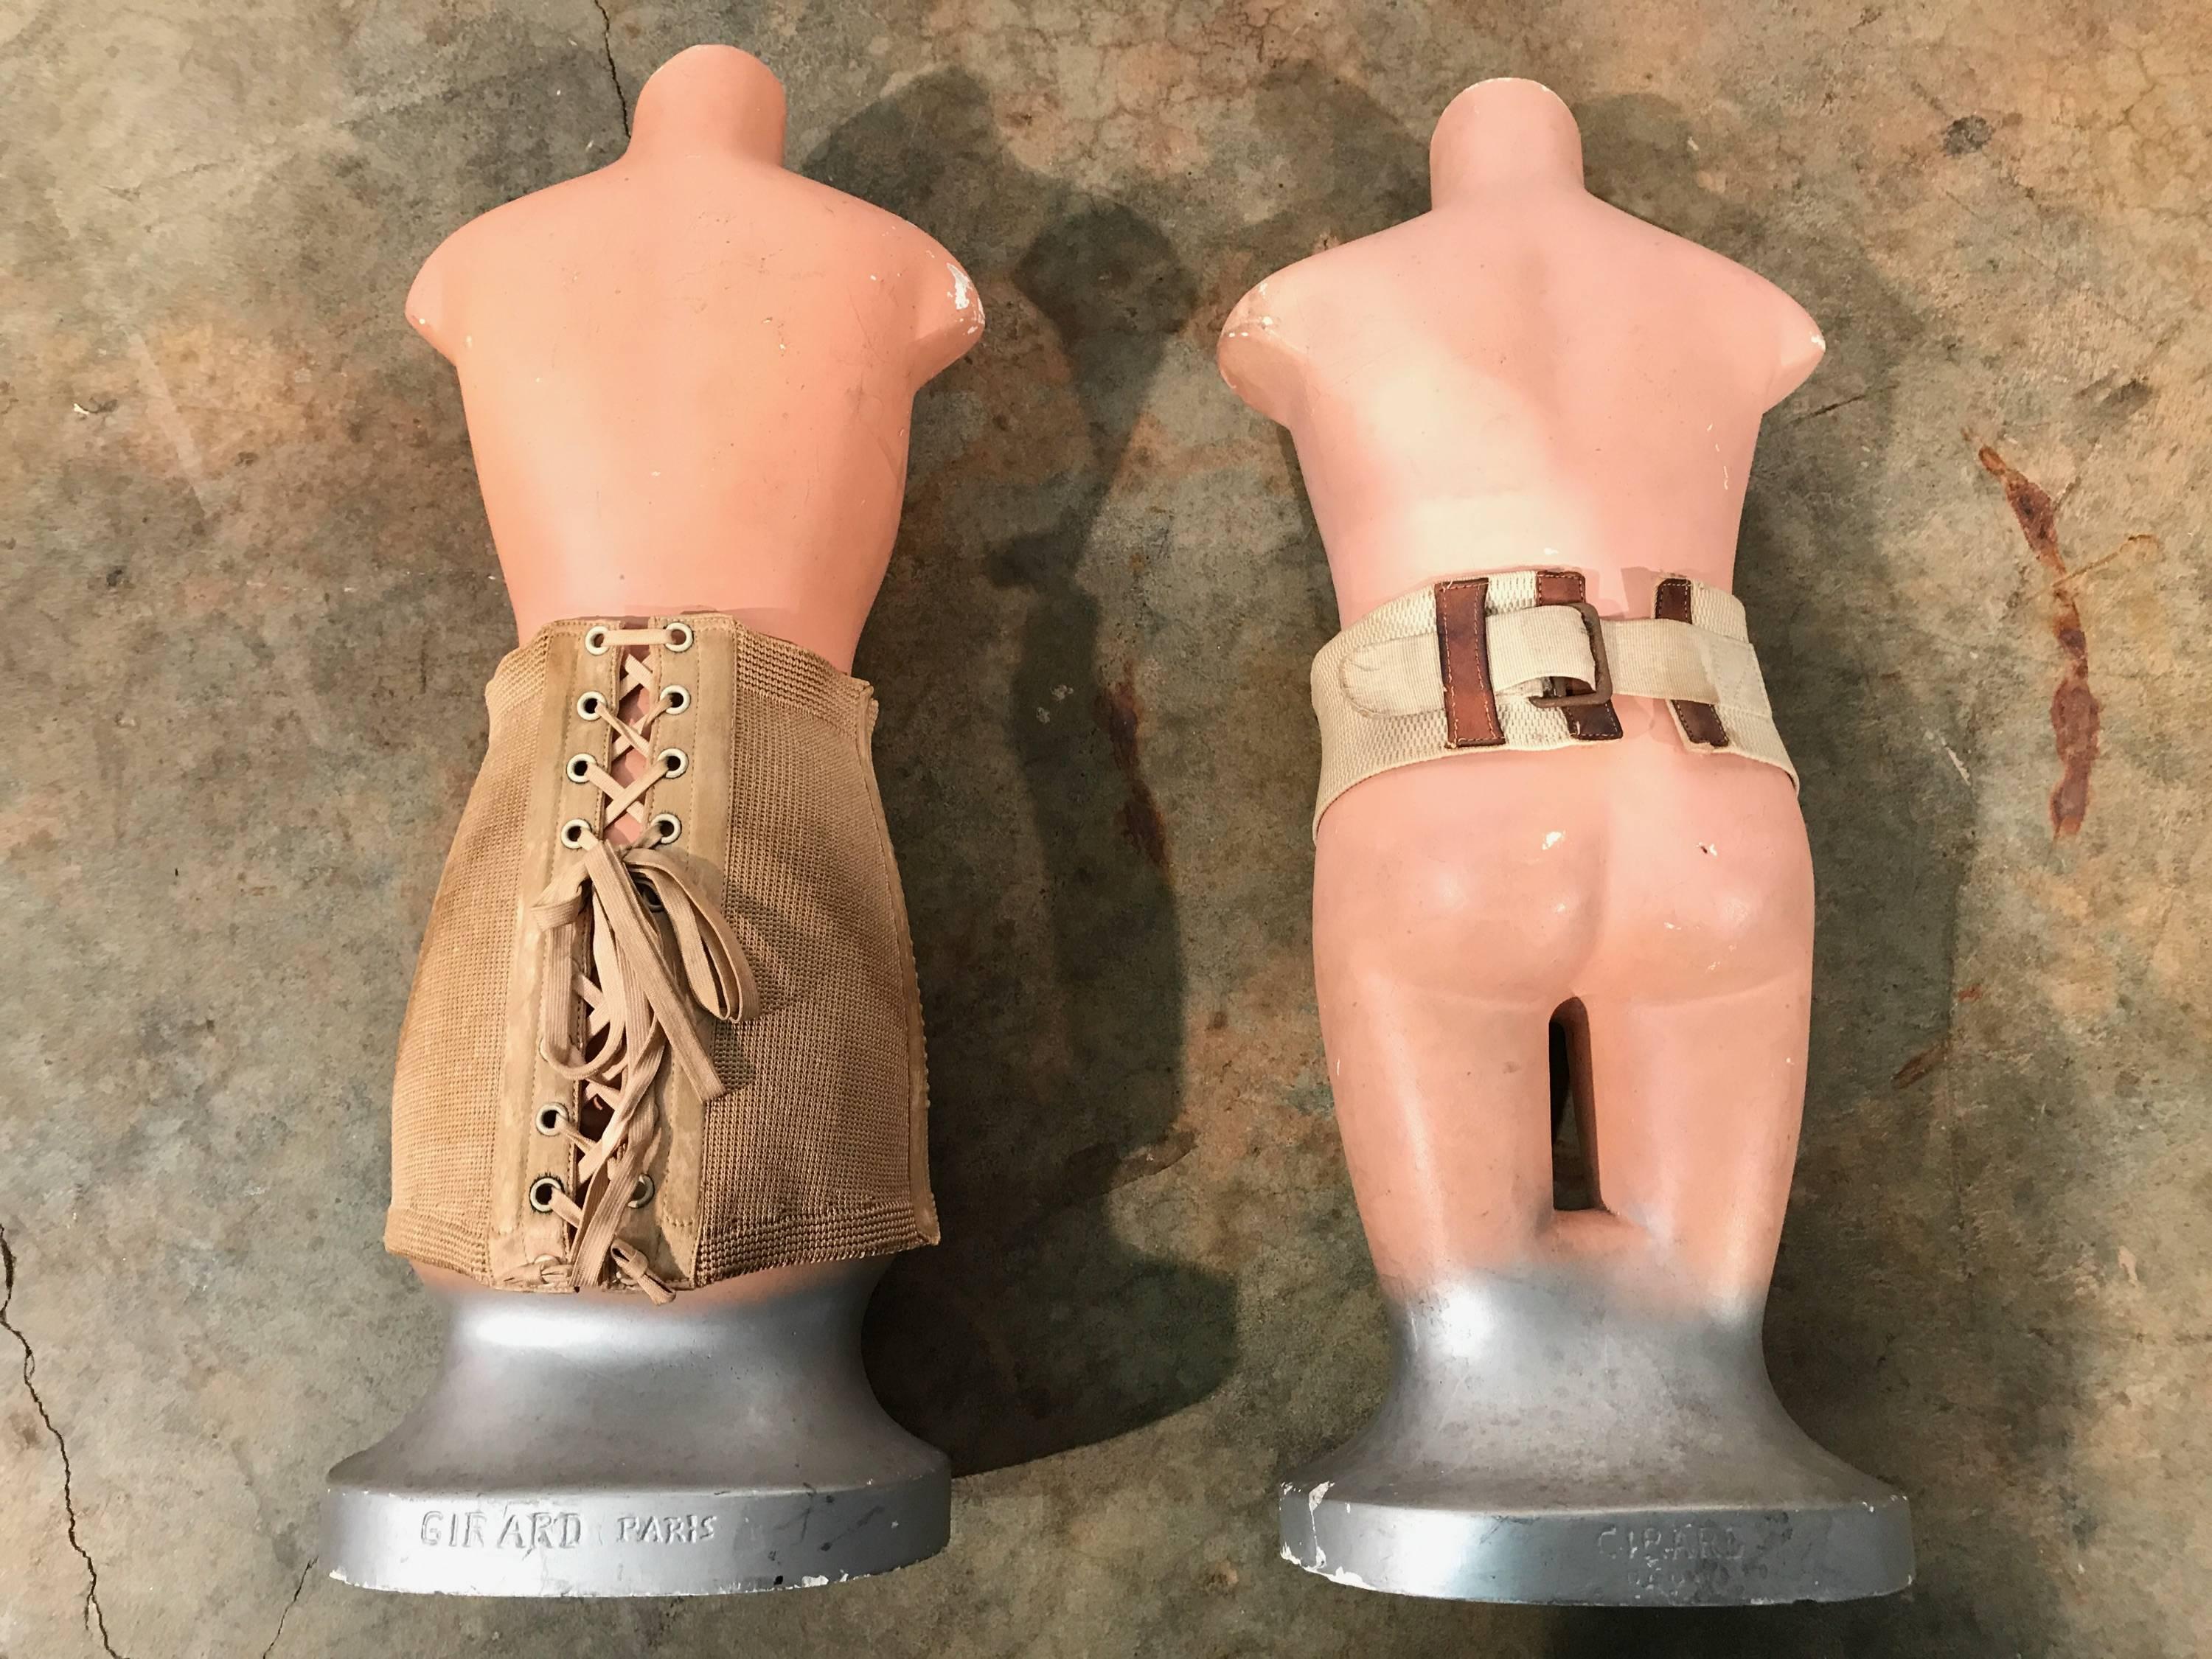 Rare Pair of French Salesman Sample Counter Top Girdle Mannequins, Girard Paris For Sale 1